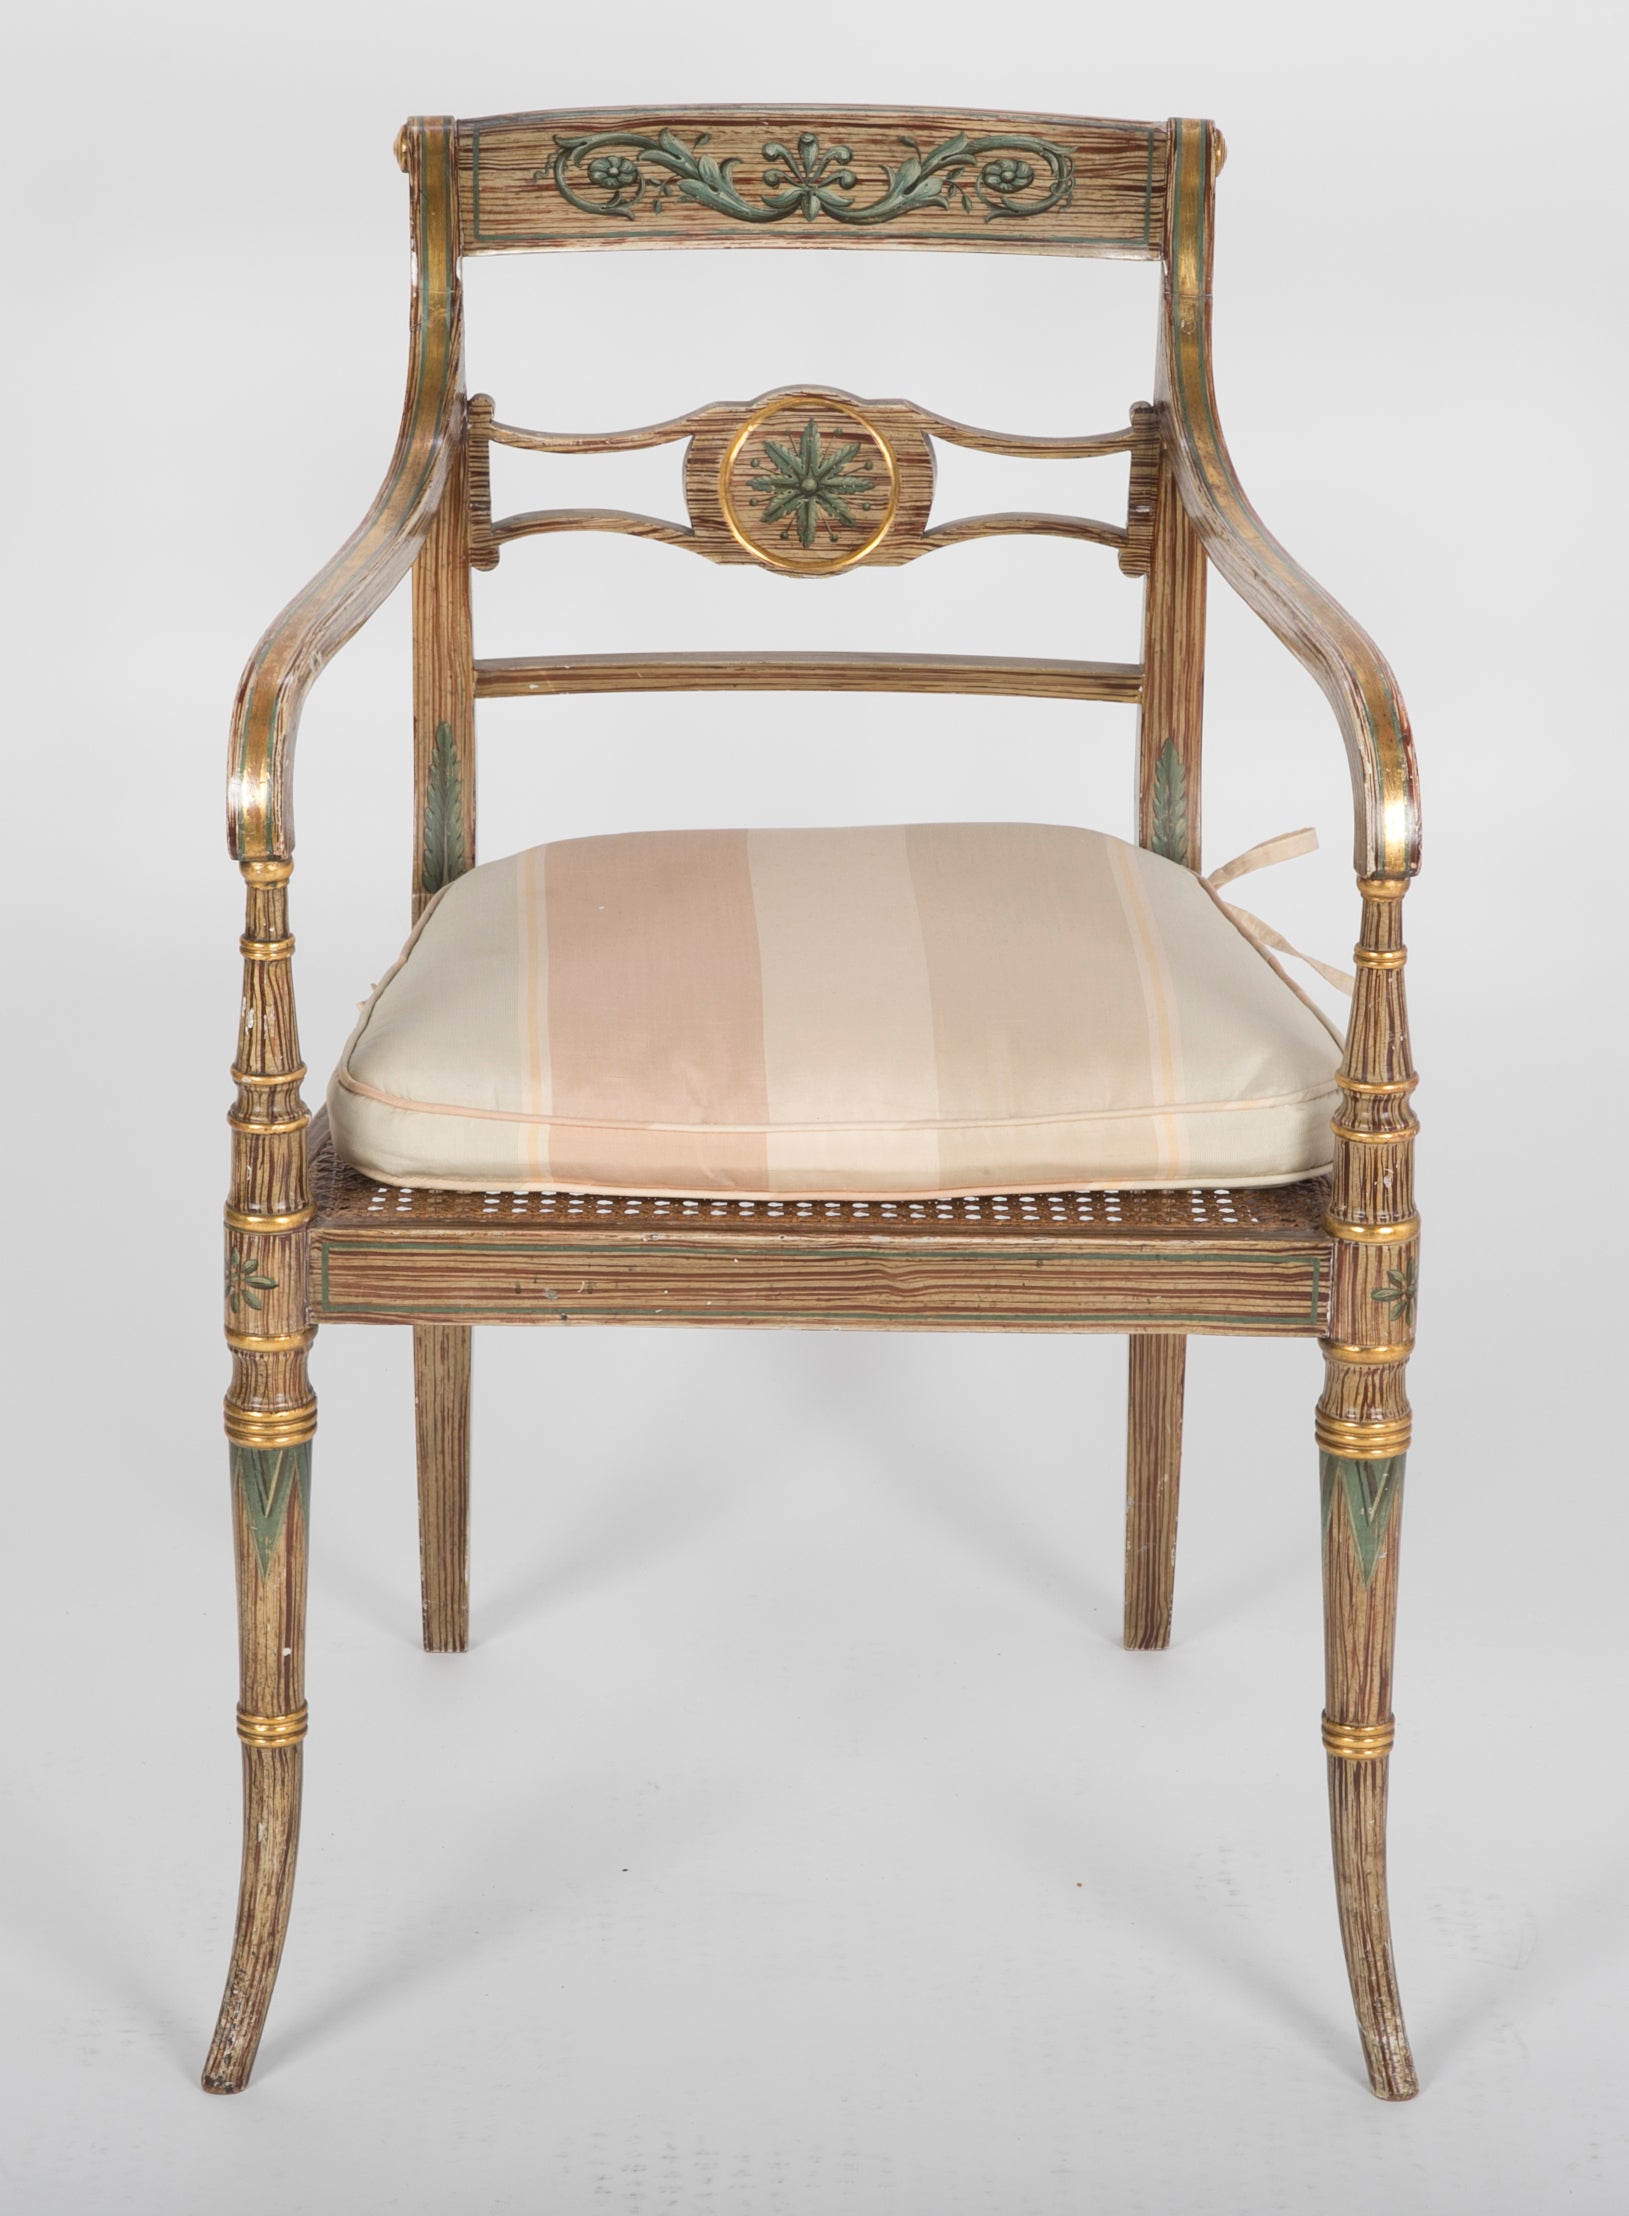 Pair of English Regency Painted Armchairs